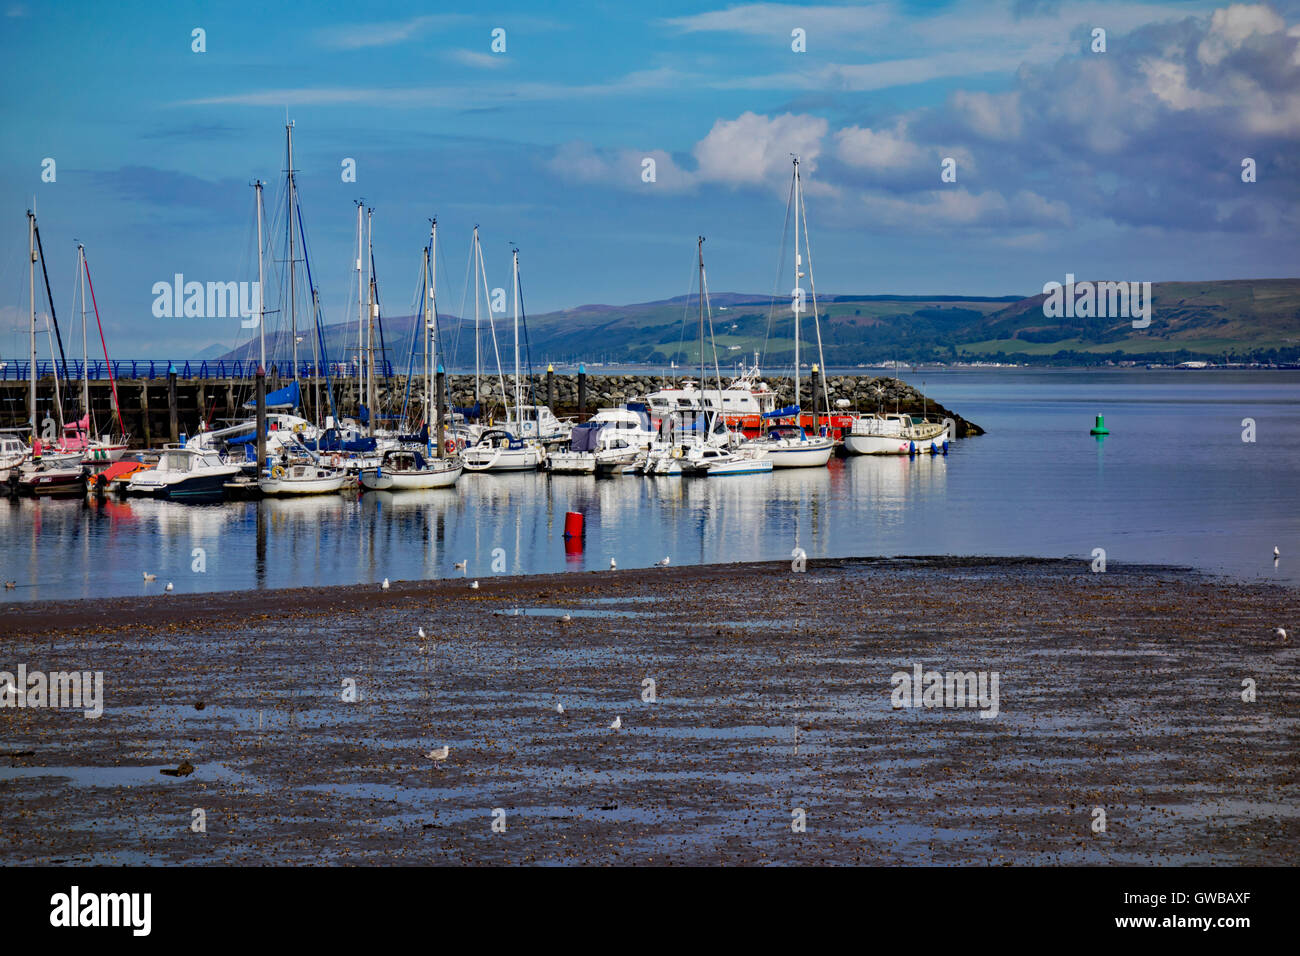 Stranraer harbour and marina, Dumfries and Galloway, Scotland. Stock Photo